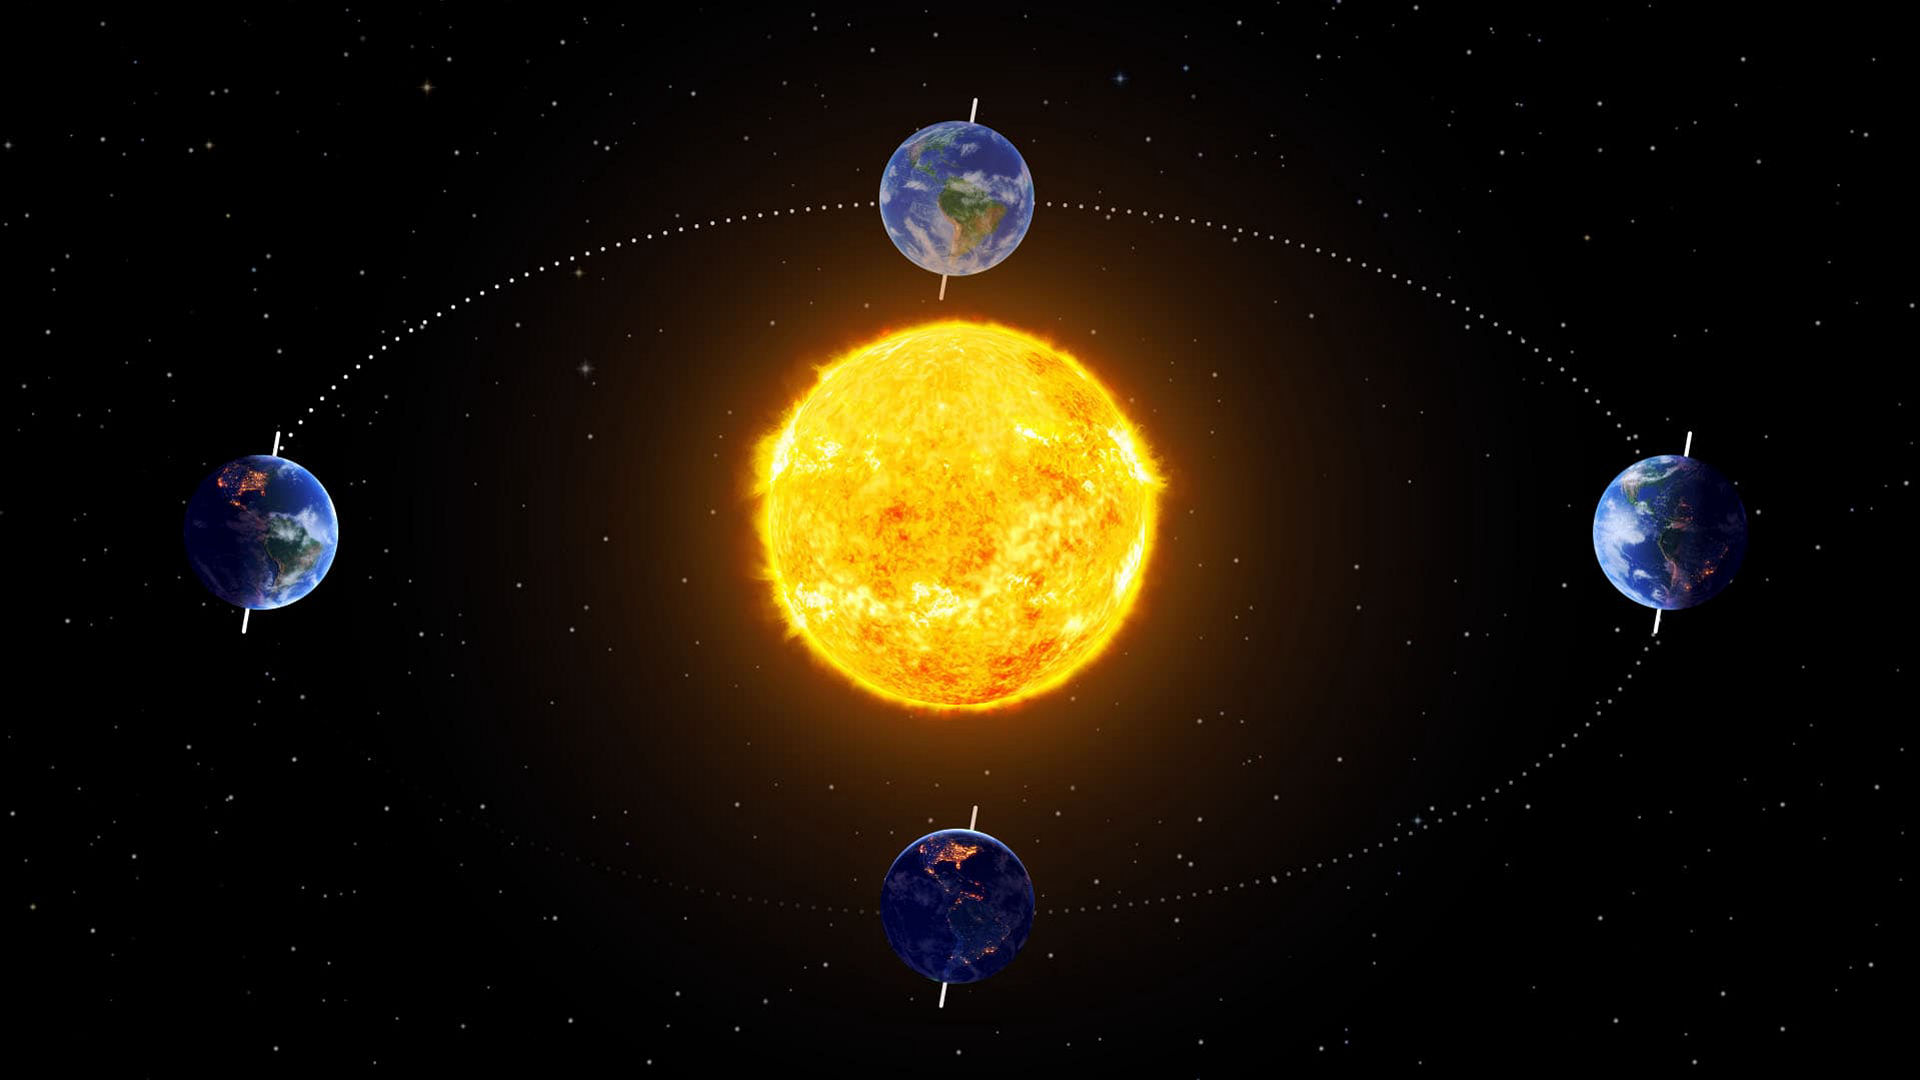 The reason for the changing seasons: the Earth's axial tilt